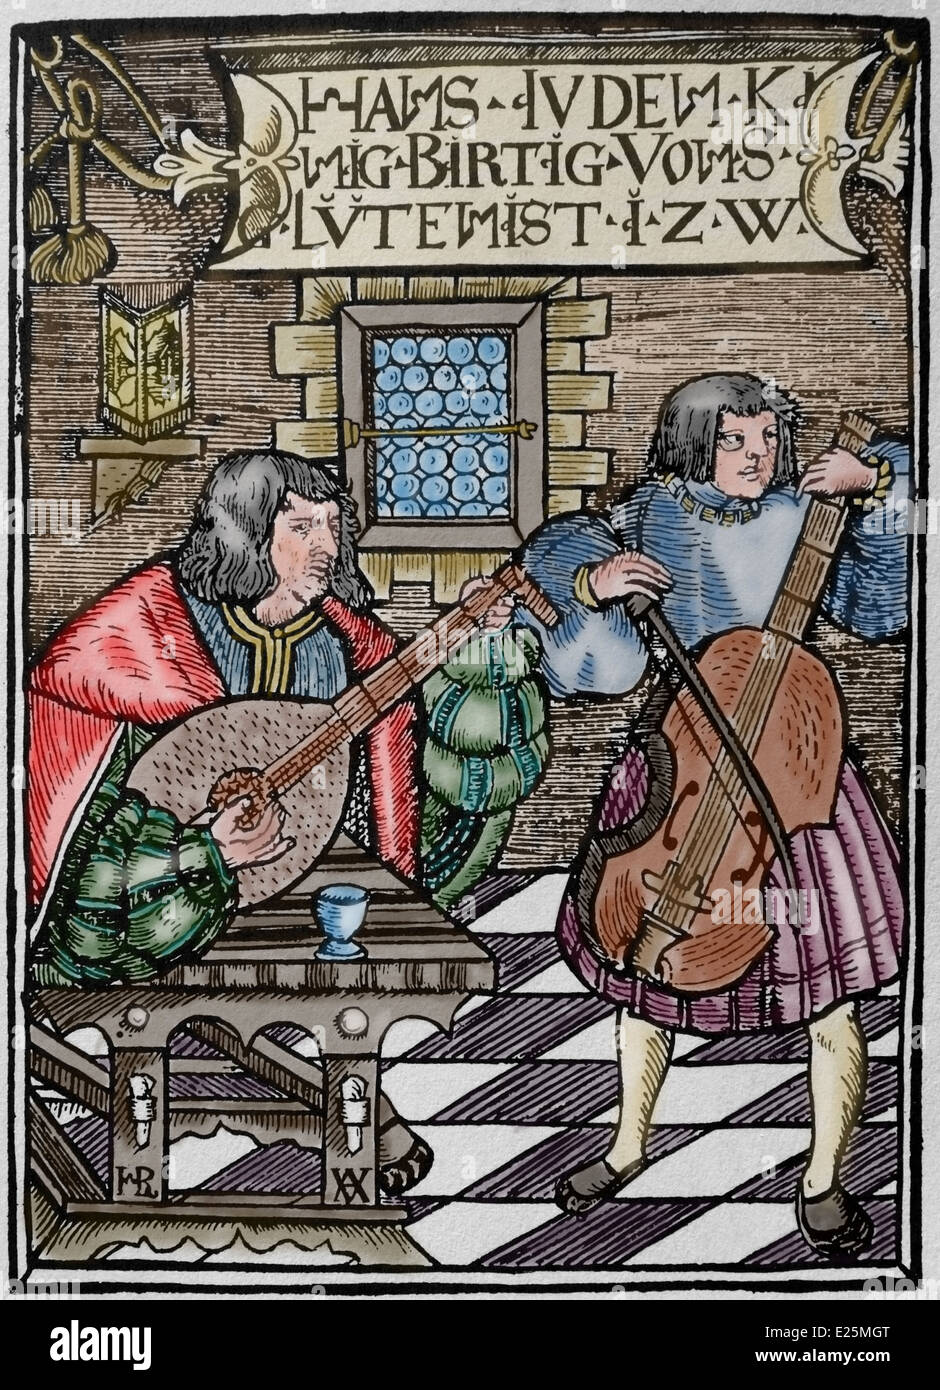 Renaissance. 16th century. Musicians playing the lute and cello. Concert. Engraving. Color. Stock Photo